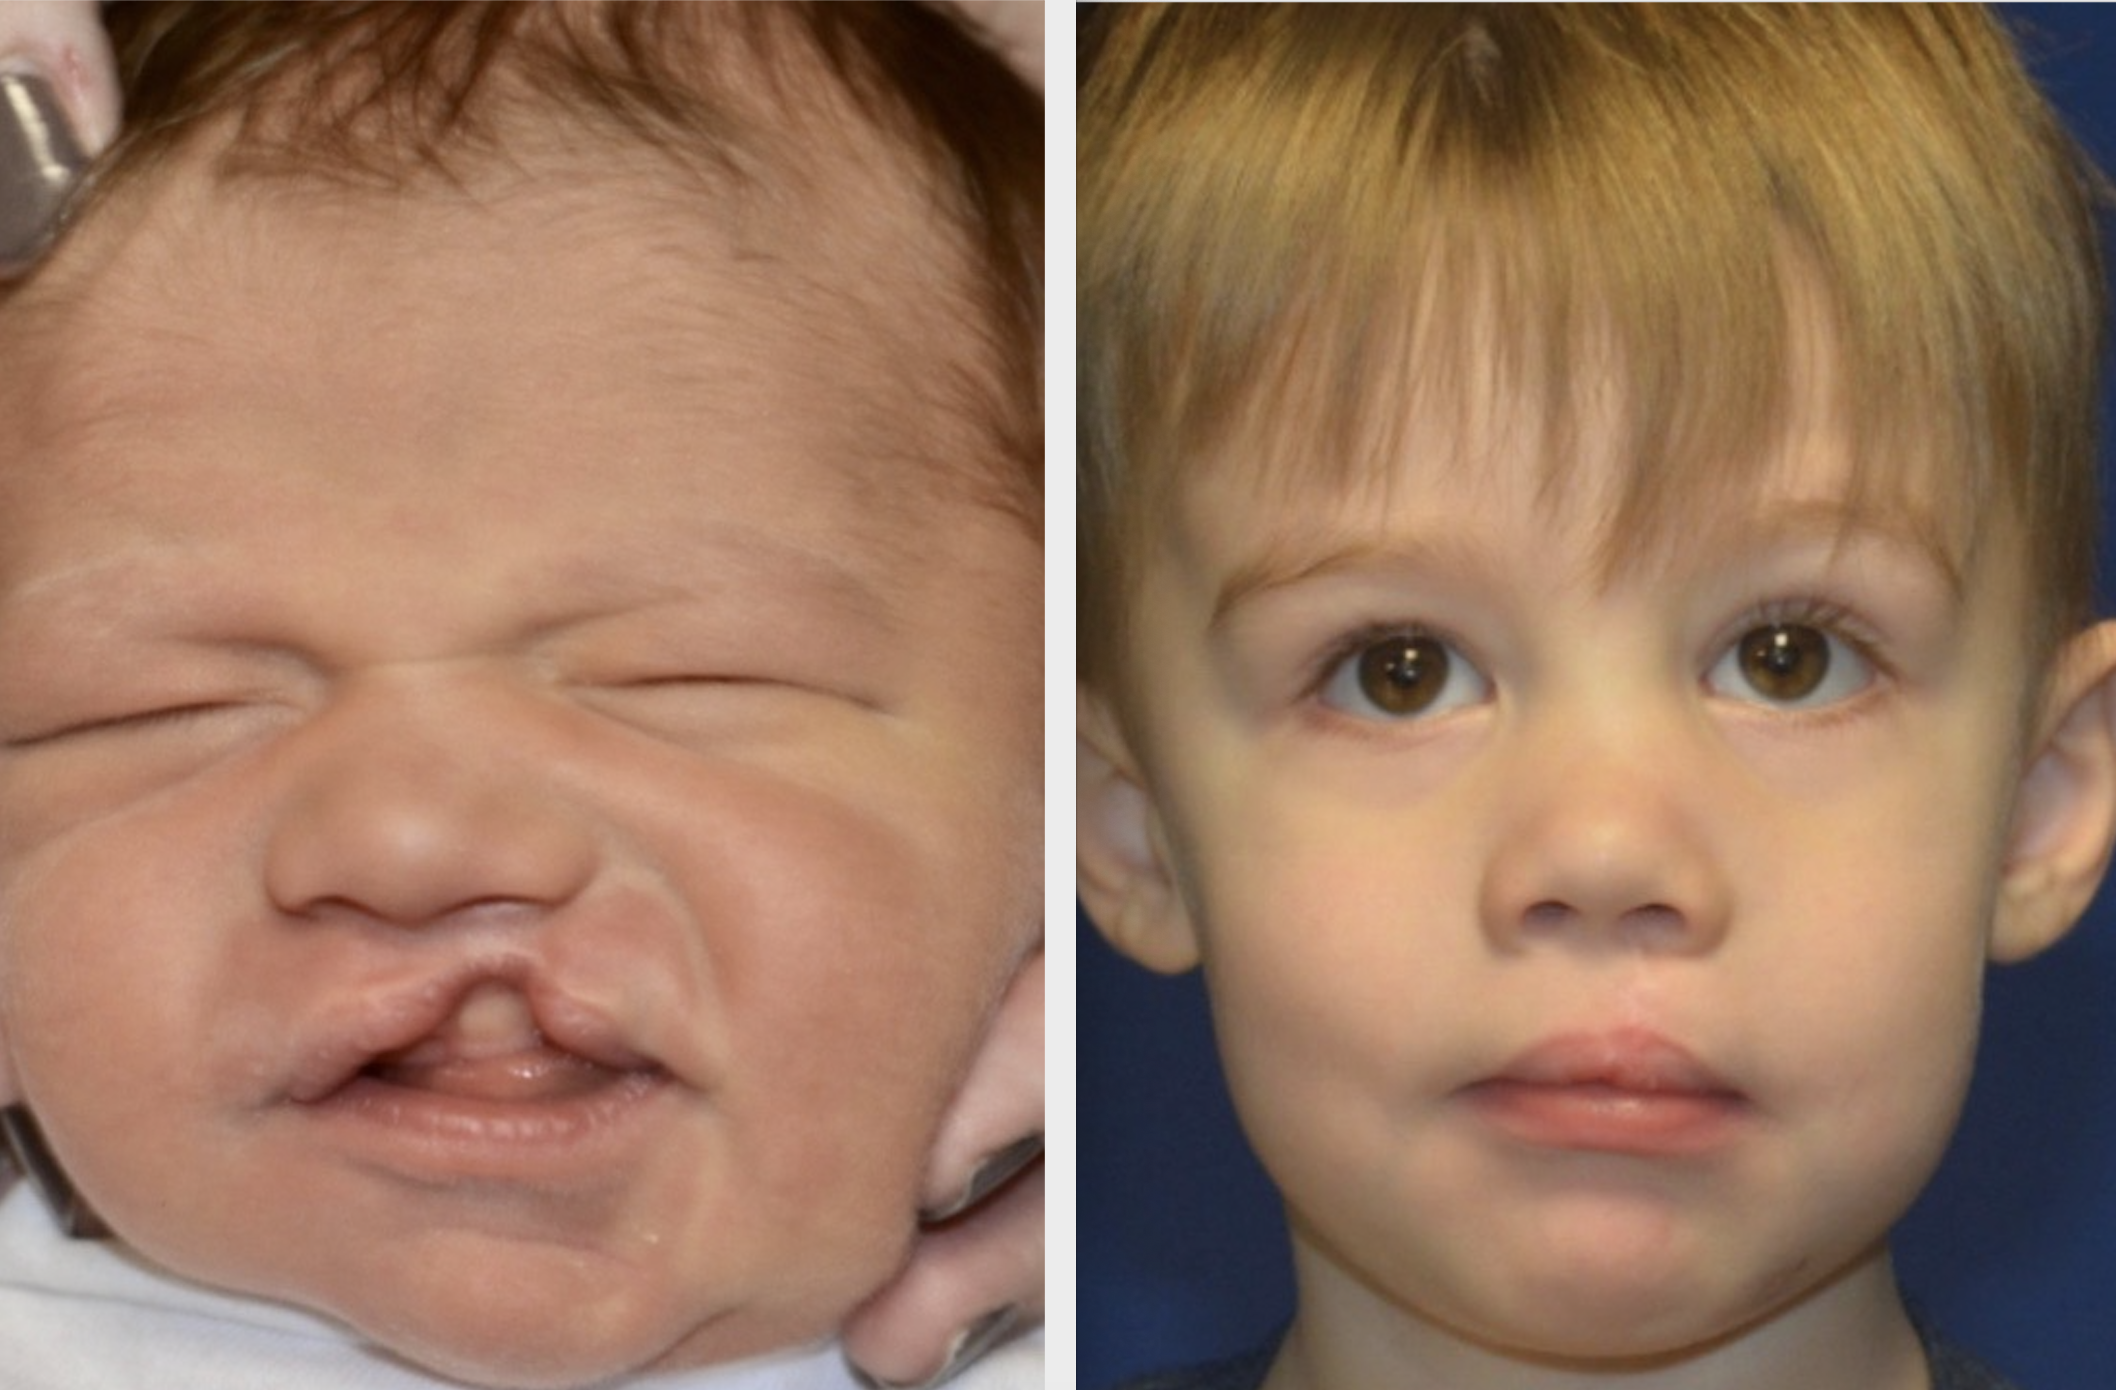 A patient of Dr. Hammoudeh who underwent ECLR at 2 weeks of age, pictured on the right 2 years after surgery.